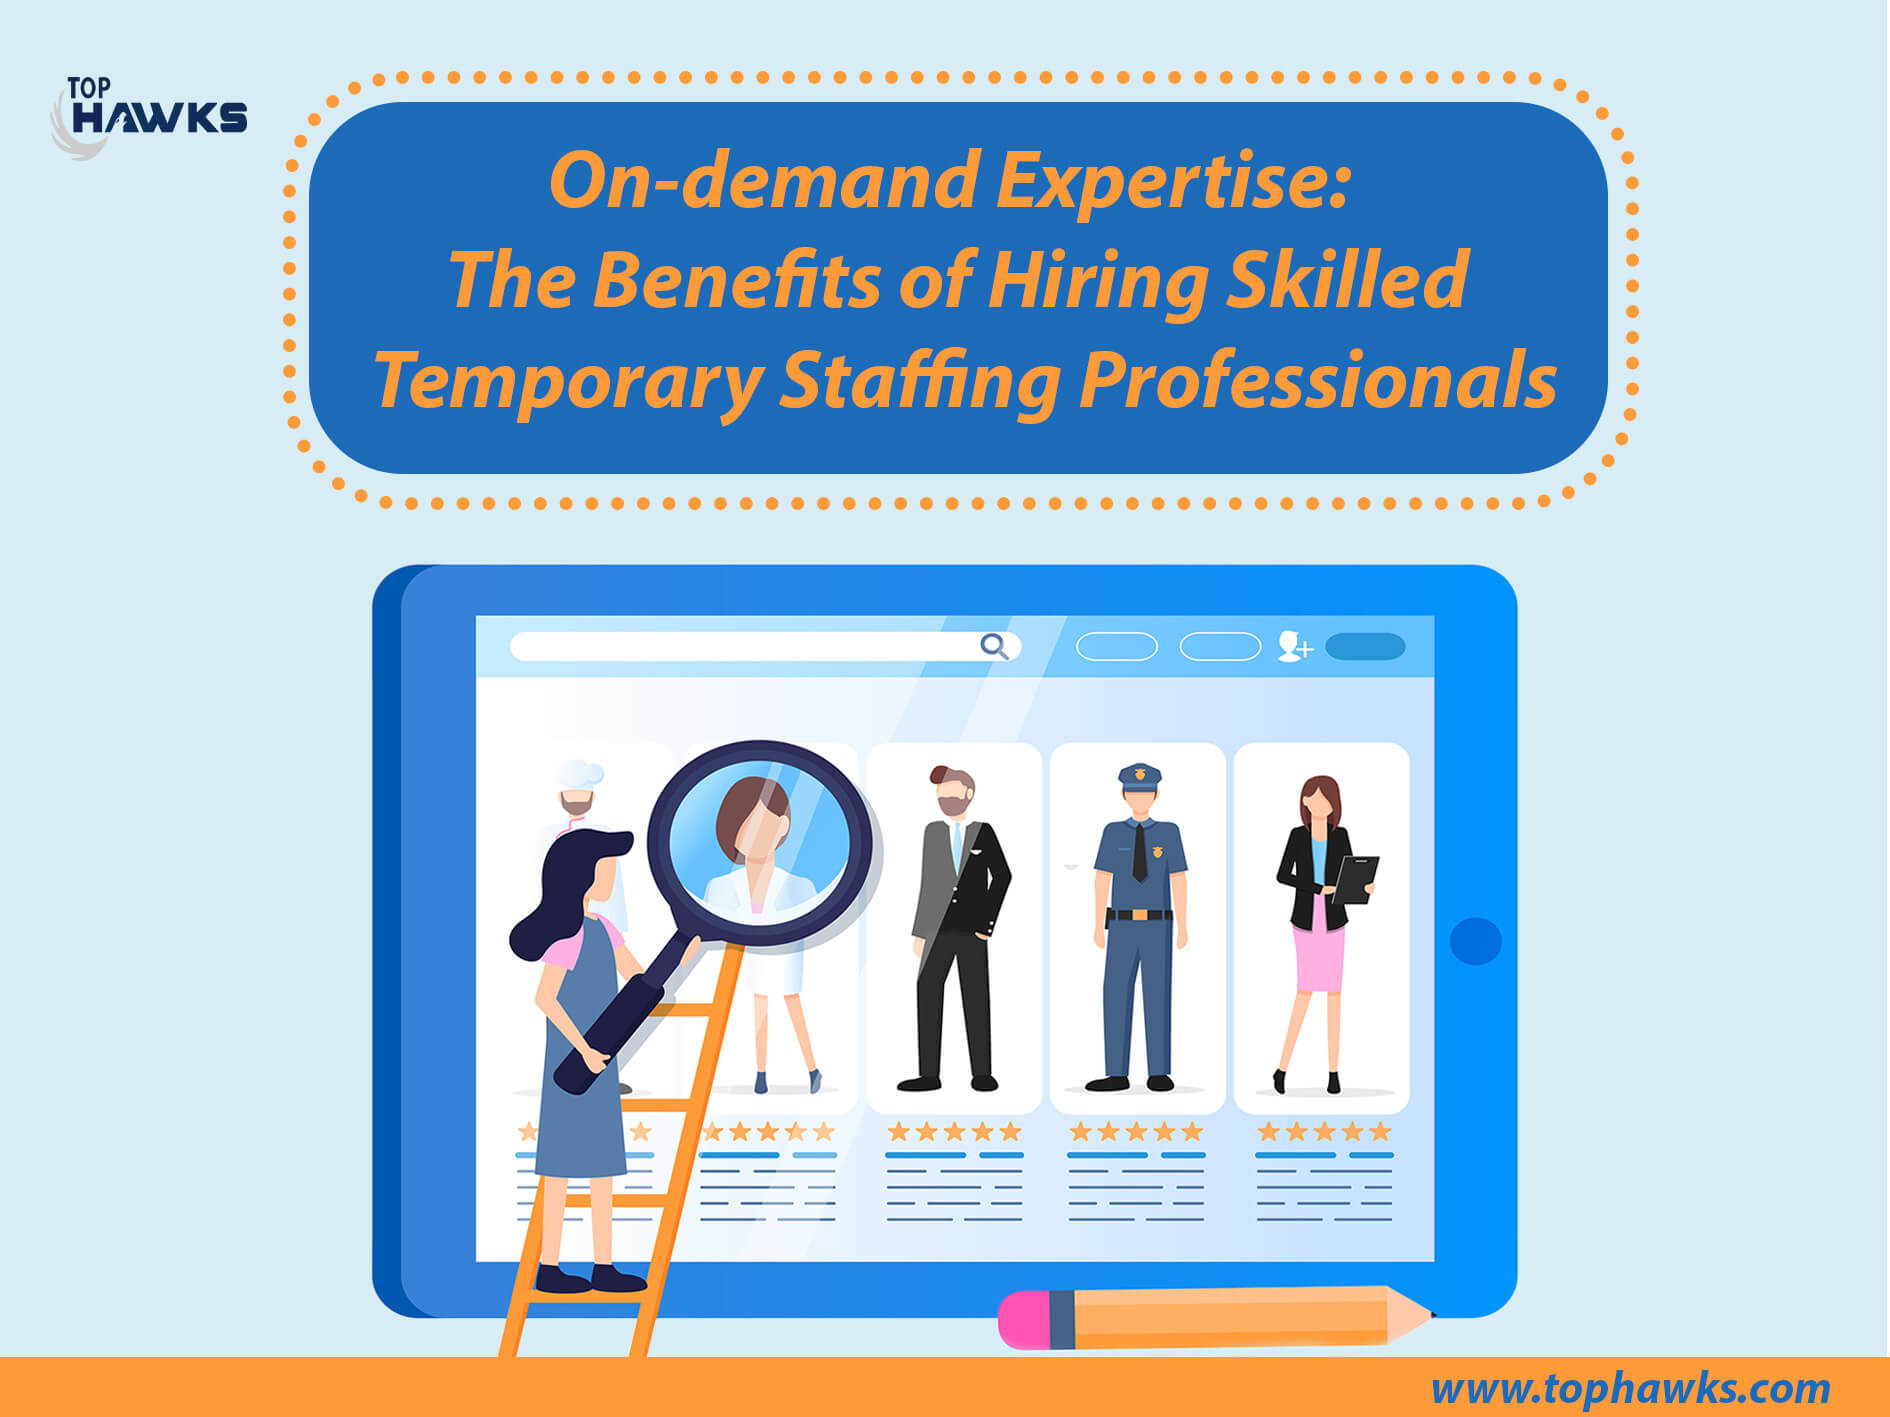 Image depicting On-demand Expertise The Benefits of Hiring Skilled Temporary Staffing Professionals